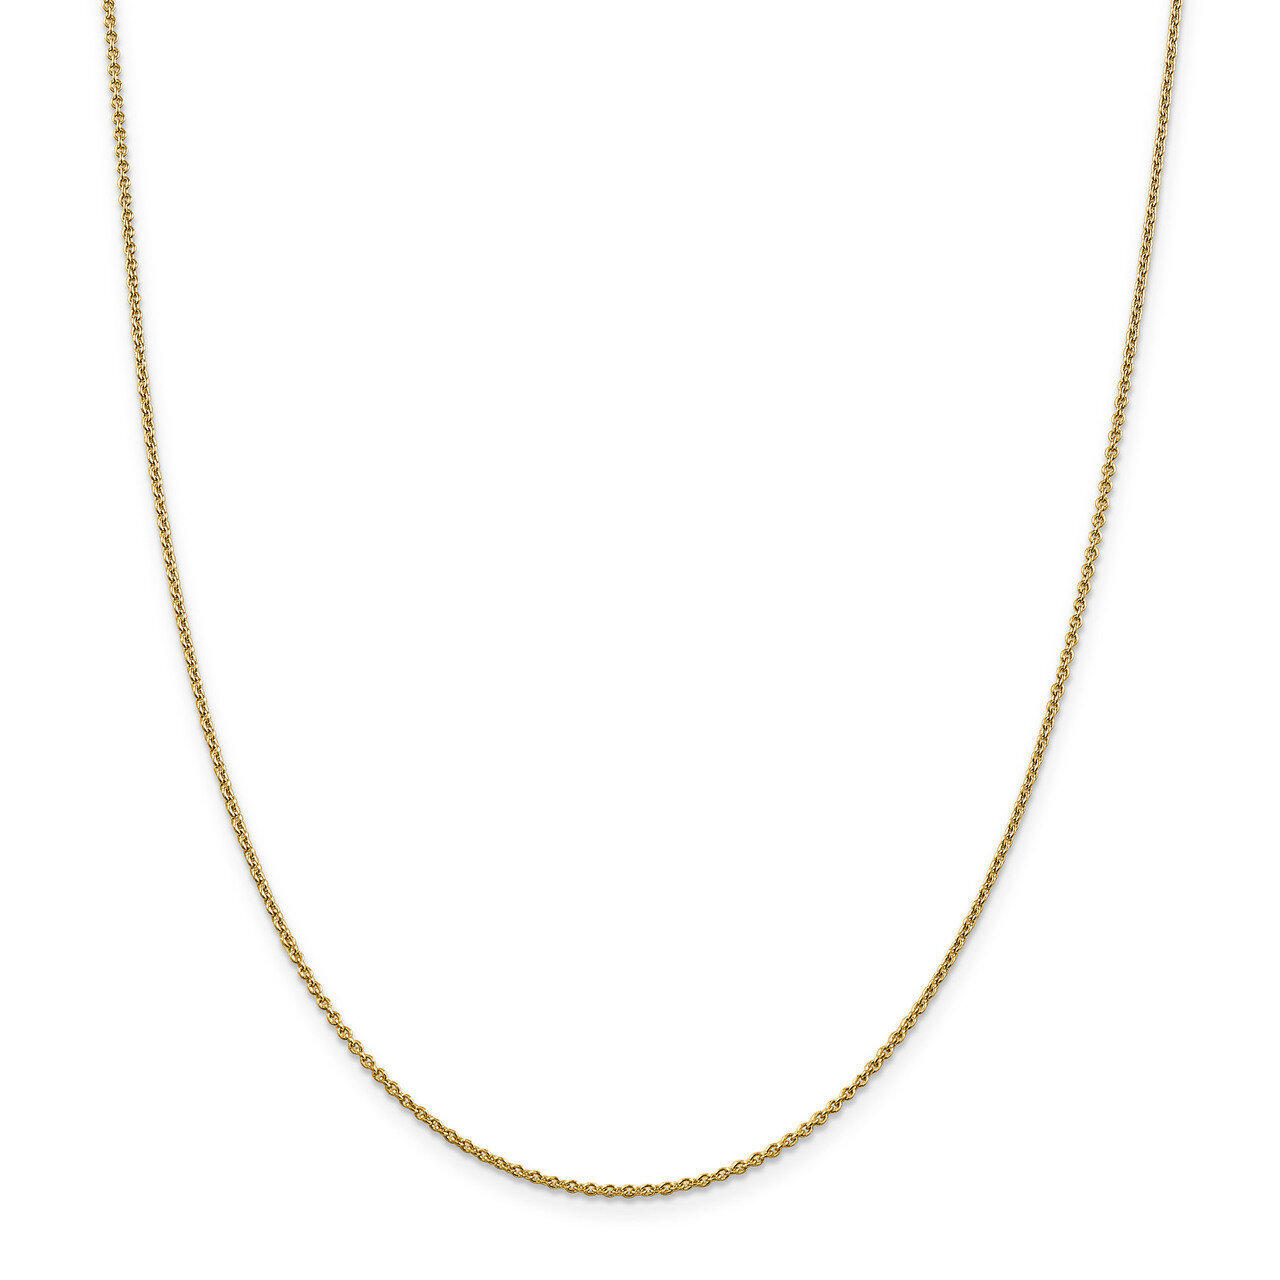 16 Inch 1.4mm Solid Polished Cable Chain 14k Gold PEN328-16